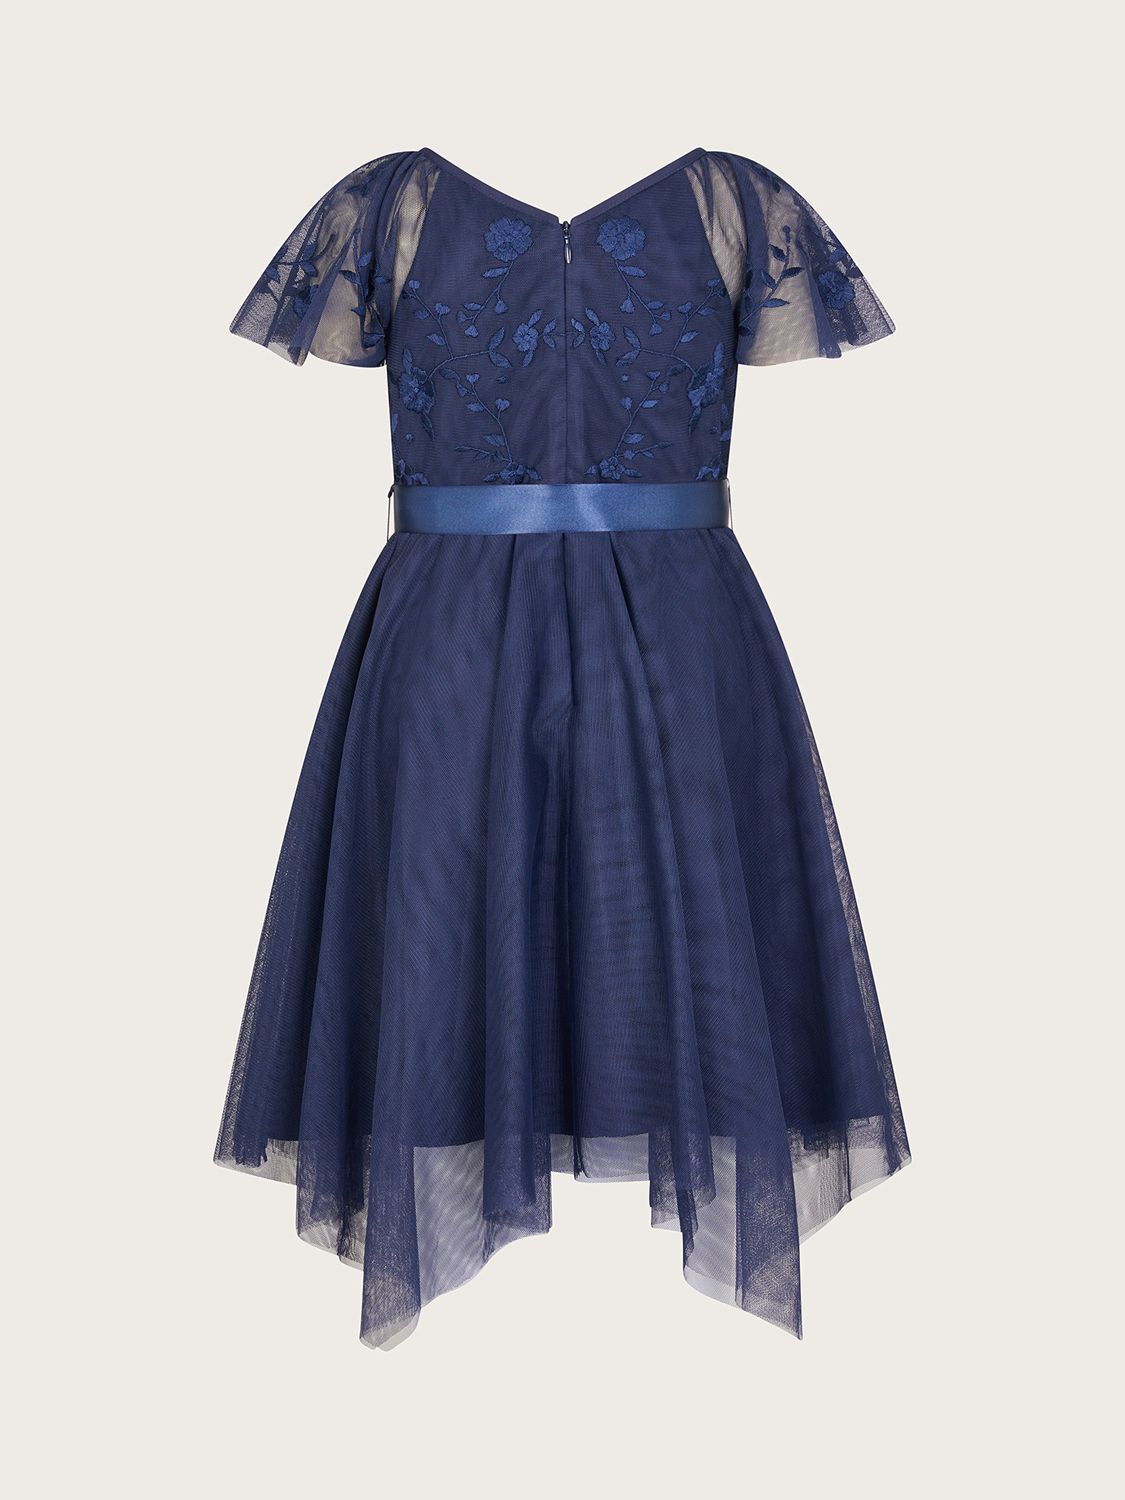 Buy Monsoon Kids' Amelia Embroidered Dress, Navy Online at johnlewis.com